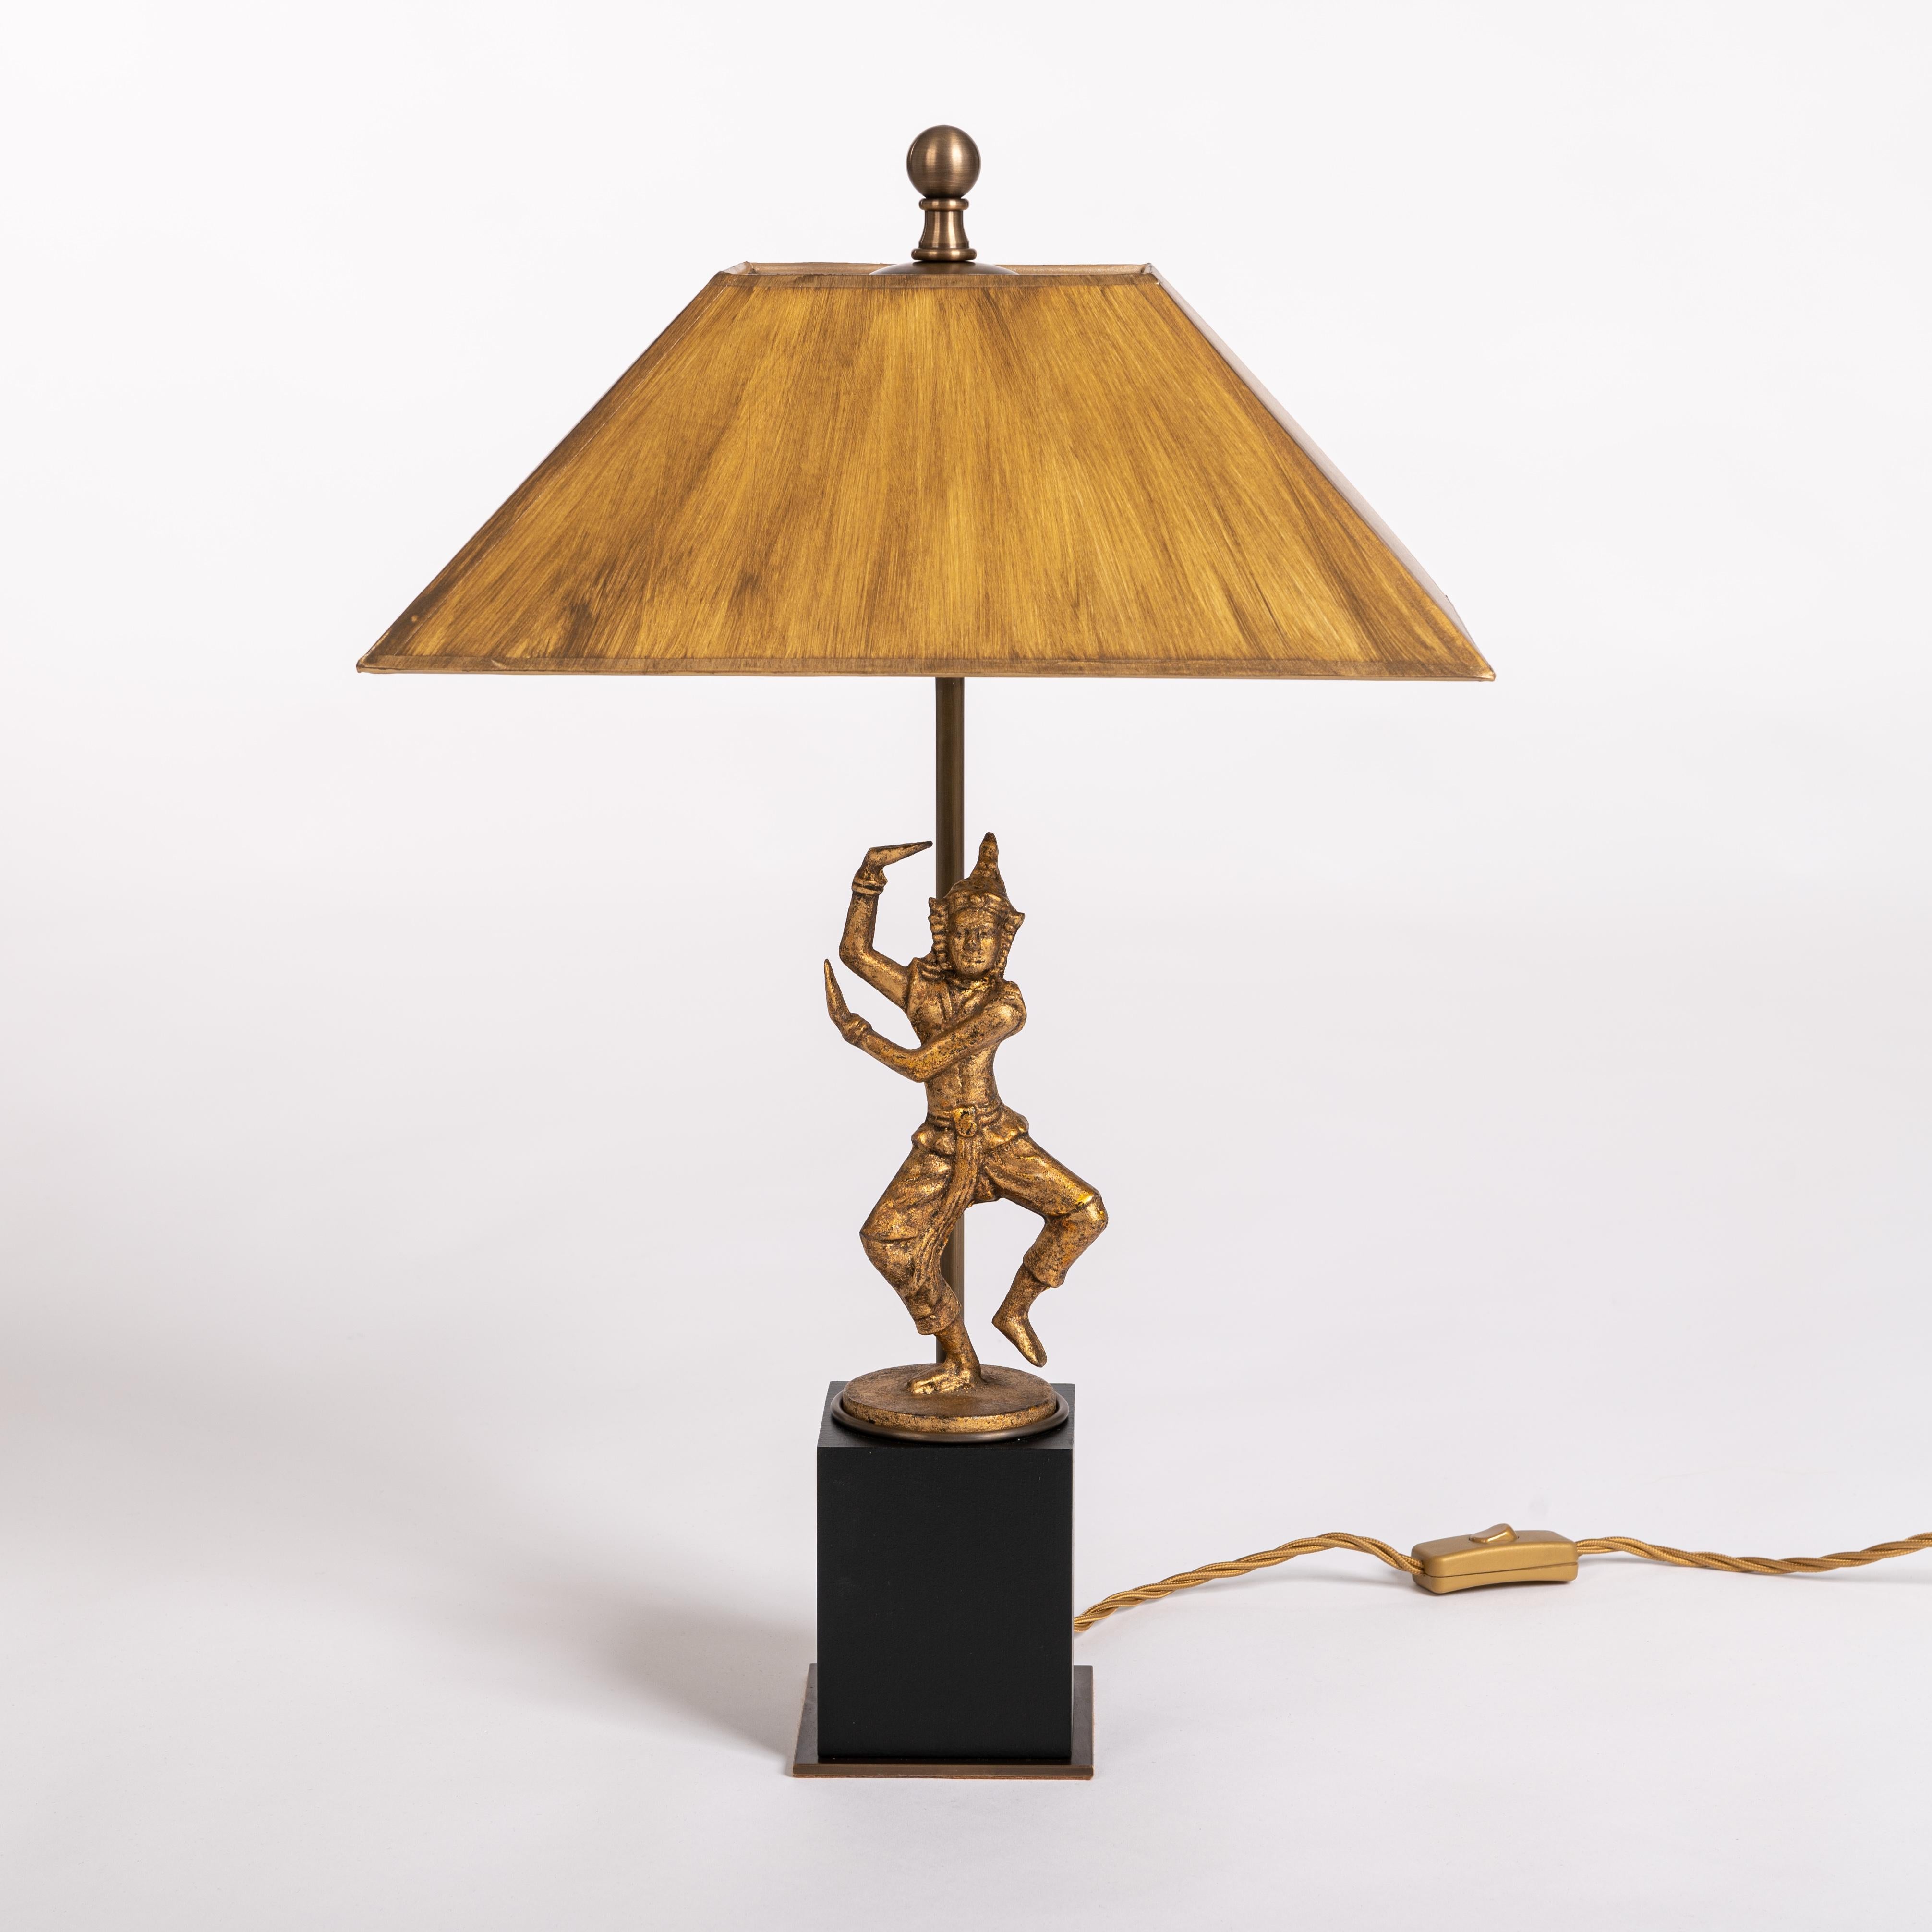 A table lamp like a piece of jewelry an eye-catcher.
A small, moving Buddhist dancer-sculpture became the focus of a table lamp.
The object from Myanmar is in its original condition and stands on a wooden base. 
The purpose built lamp construction